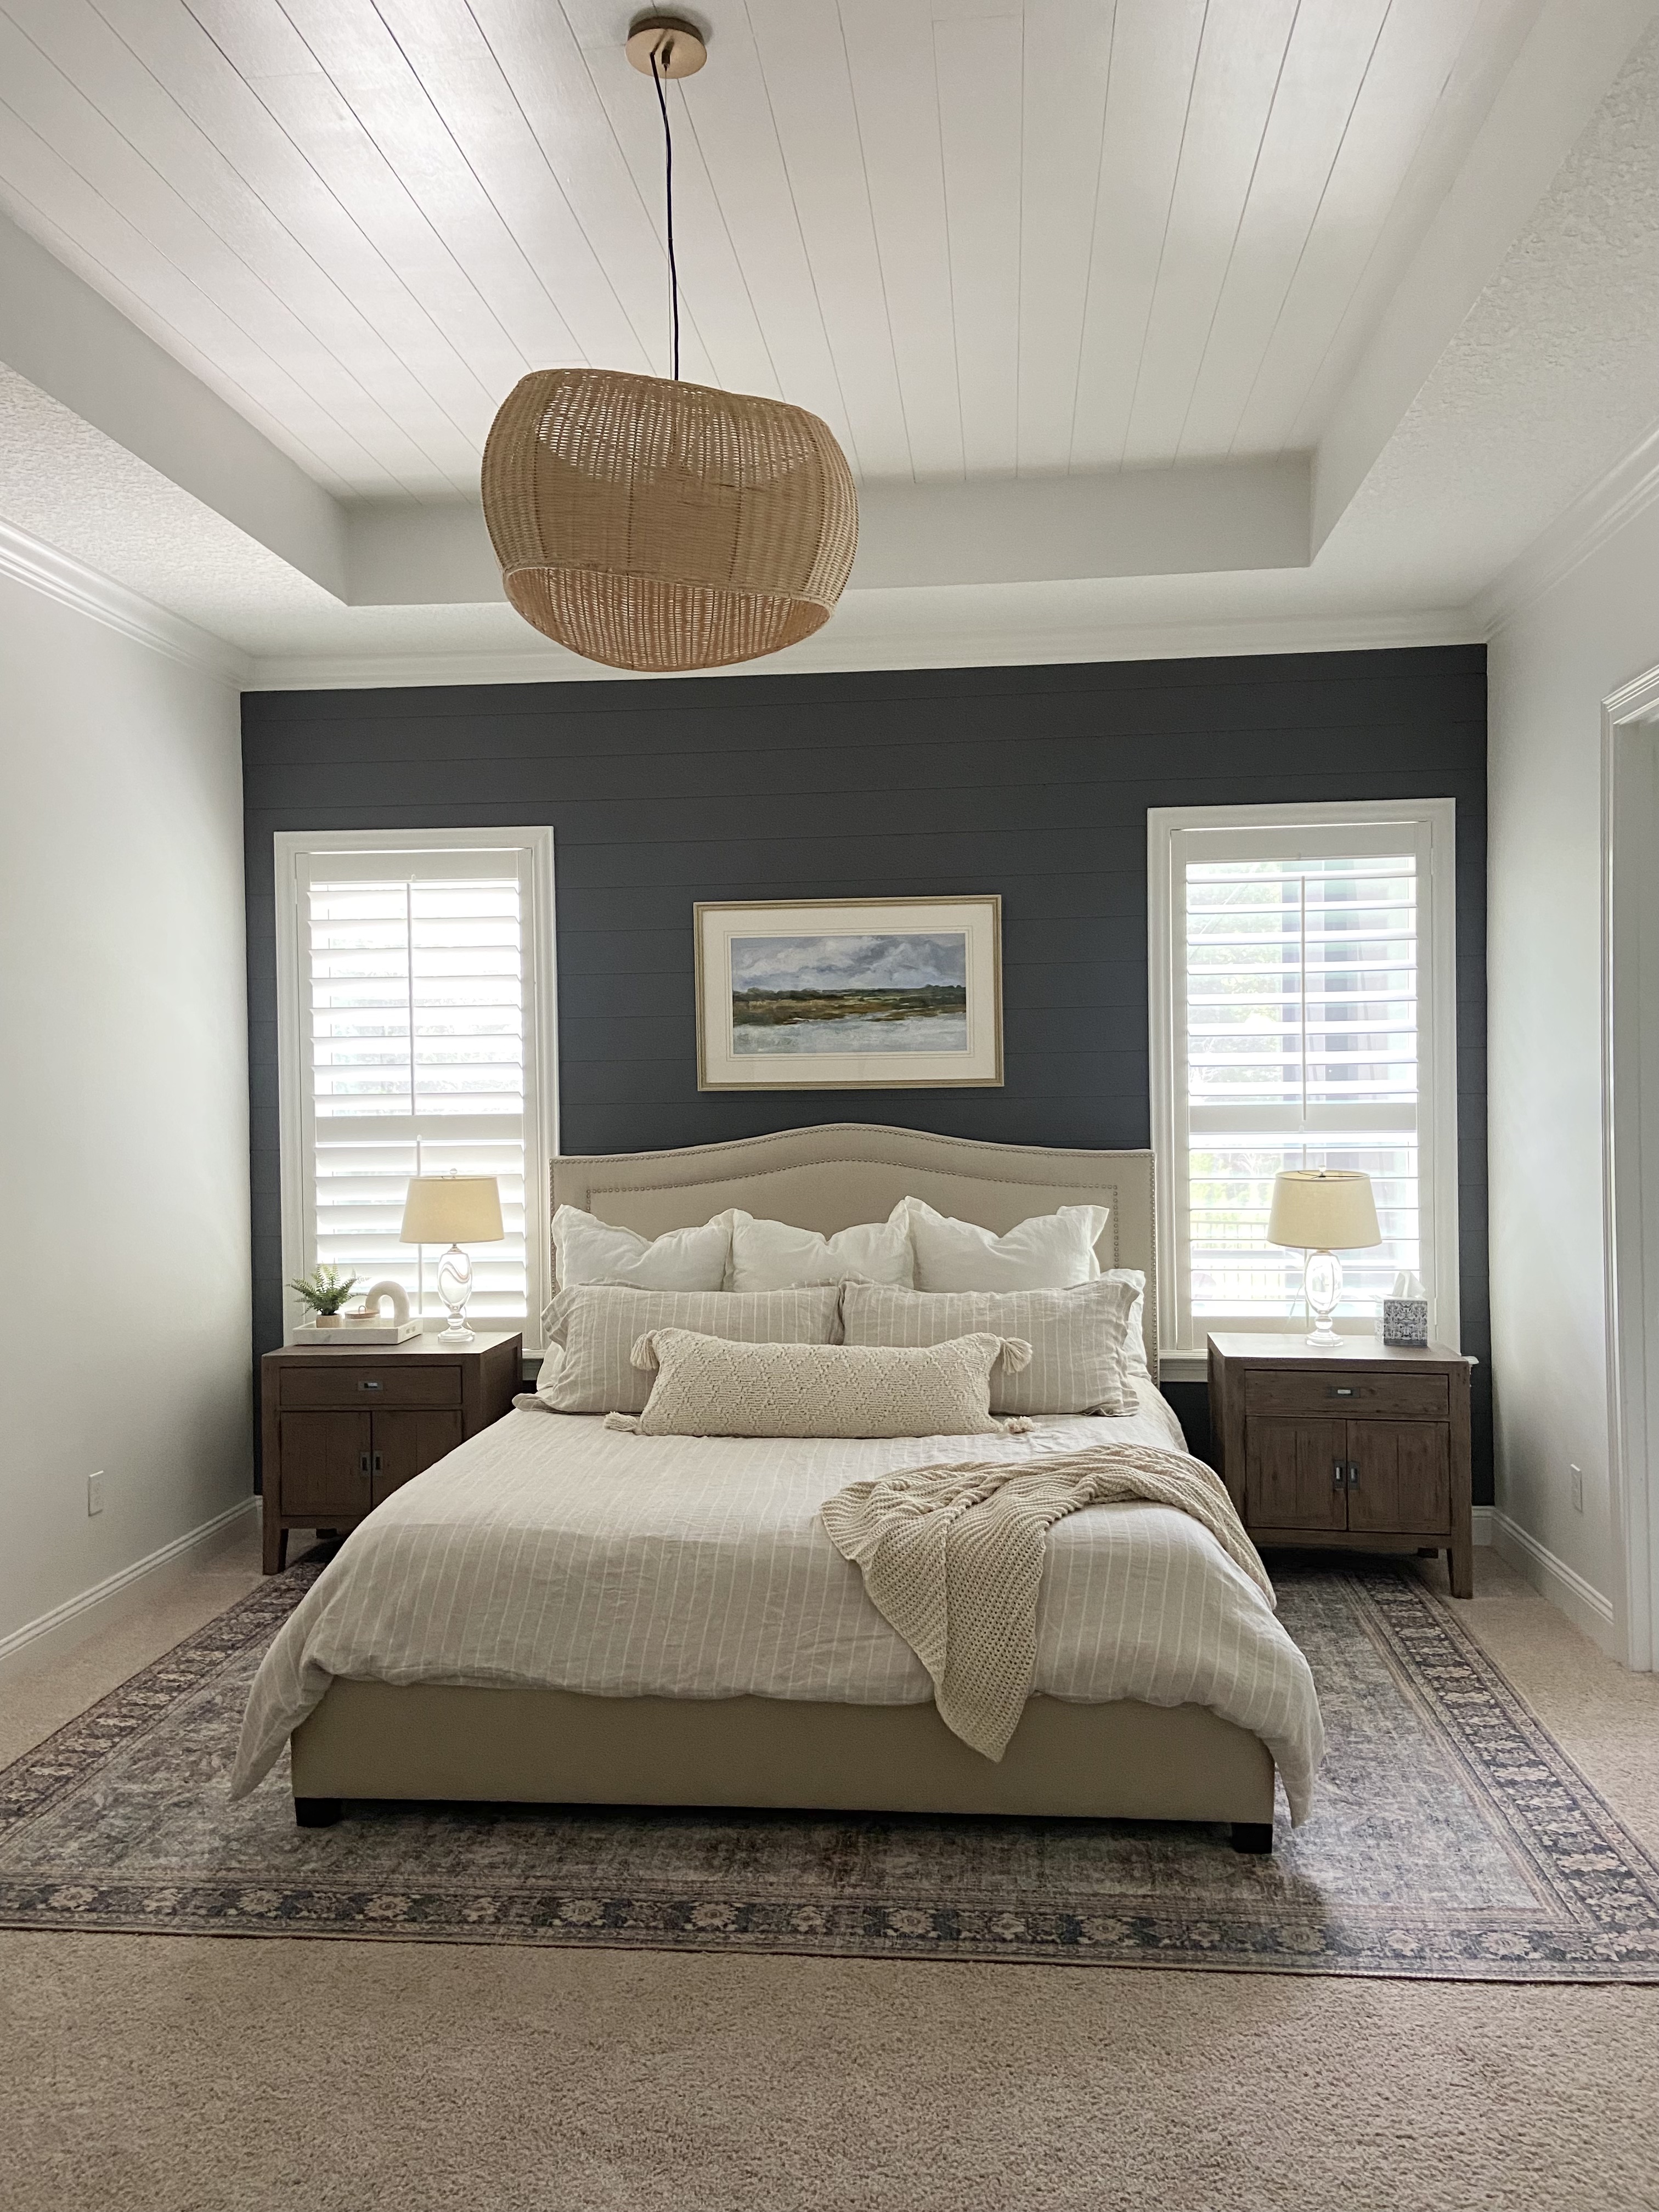 This dark blue accent wall features two windows on either side of the bed, creating the perfect balance of symmetry.